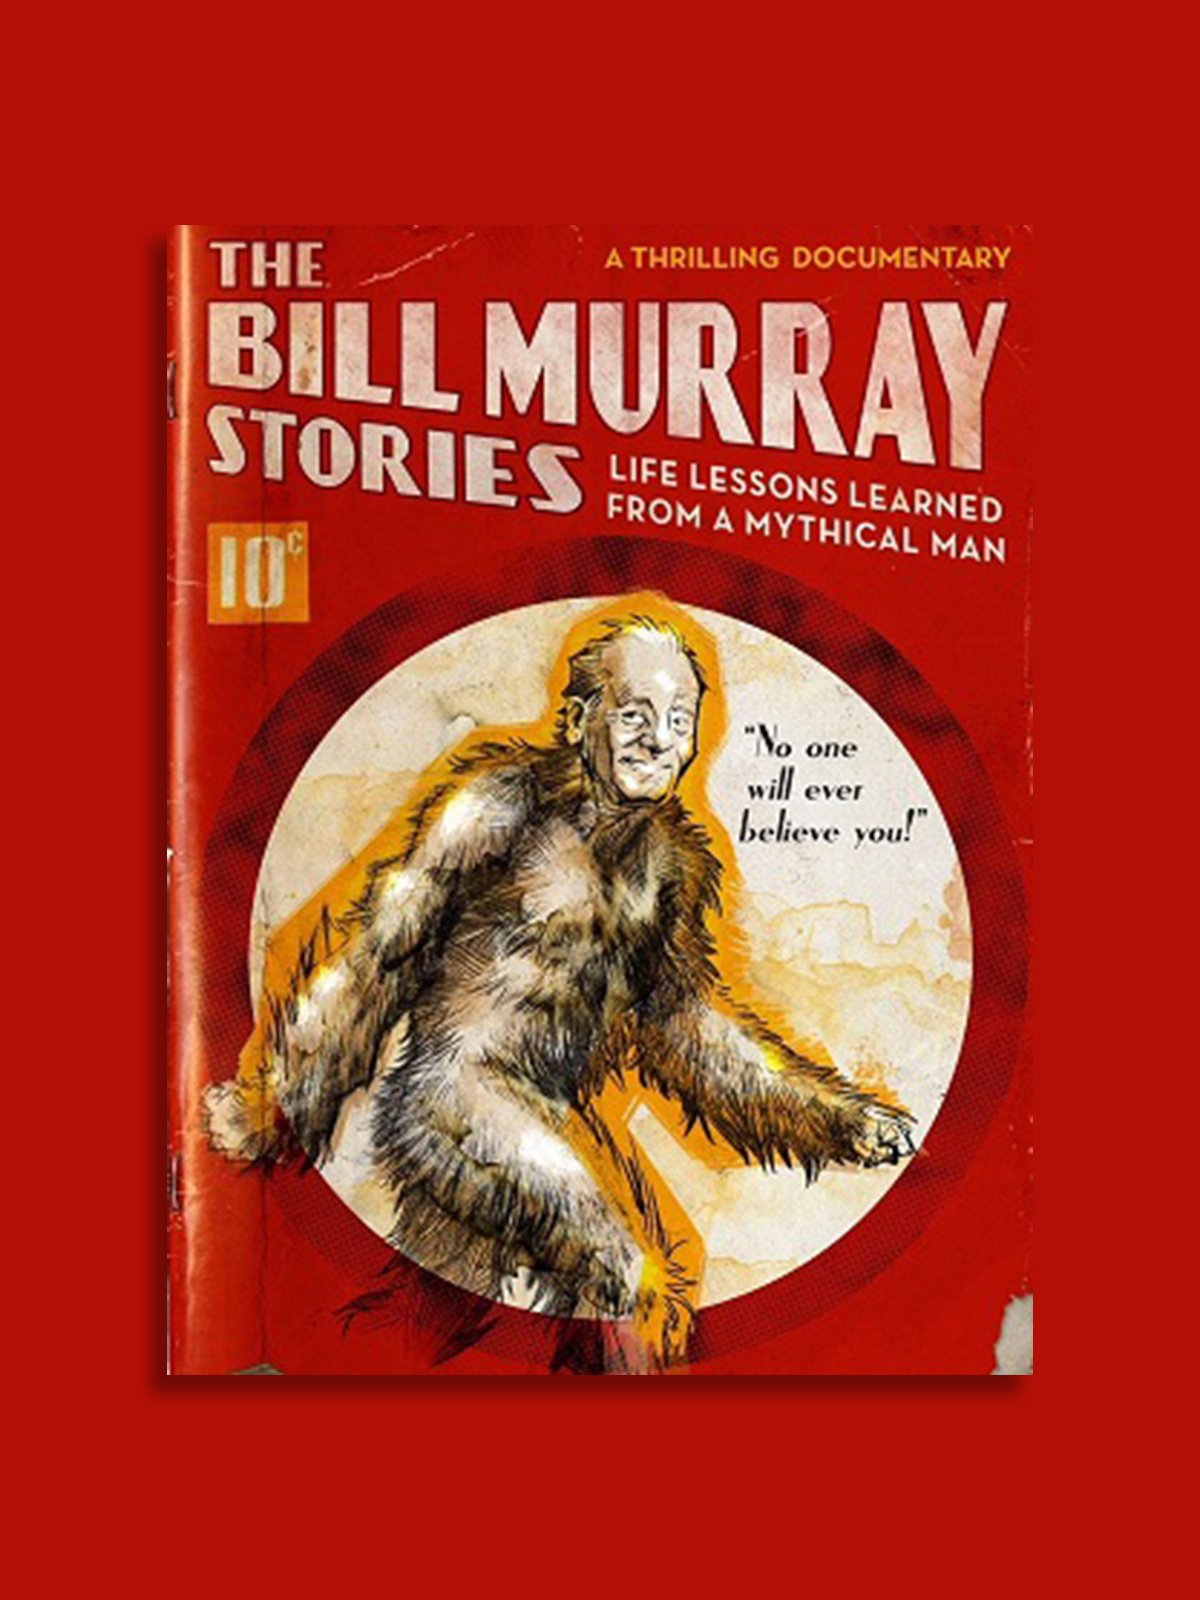 The Bill Murray Stories: Life Lessons Learned from a Mythical Man I went into this movie with zero expectations, and walked away feeling inspired and energized... with a perma-smile on my face for days. The film is shot from the perspective of a Bill Murray fan who's fascinated by the star's bizarre habit of popping up in the most surprisingly normal situations - when regular people least expect it. What inspired me most was how Murray took so much joy from making others happy, and actually changed people's lives by showing up and just listening to them.